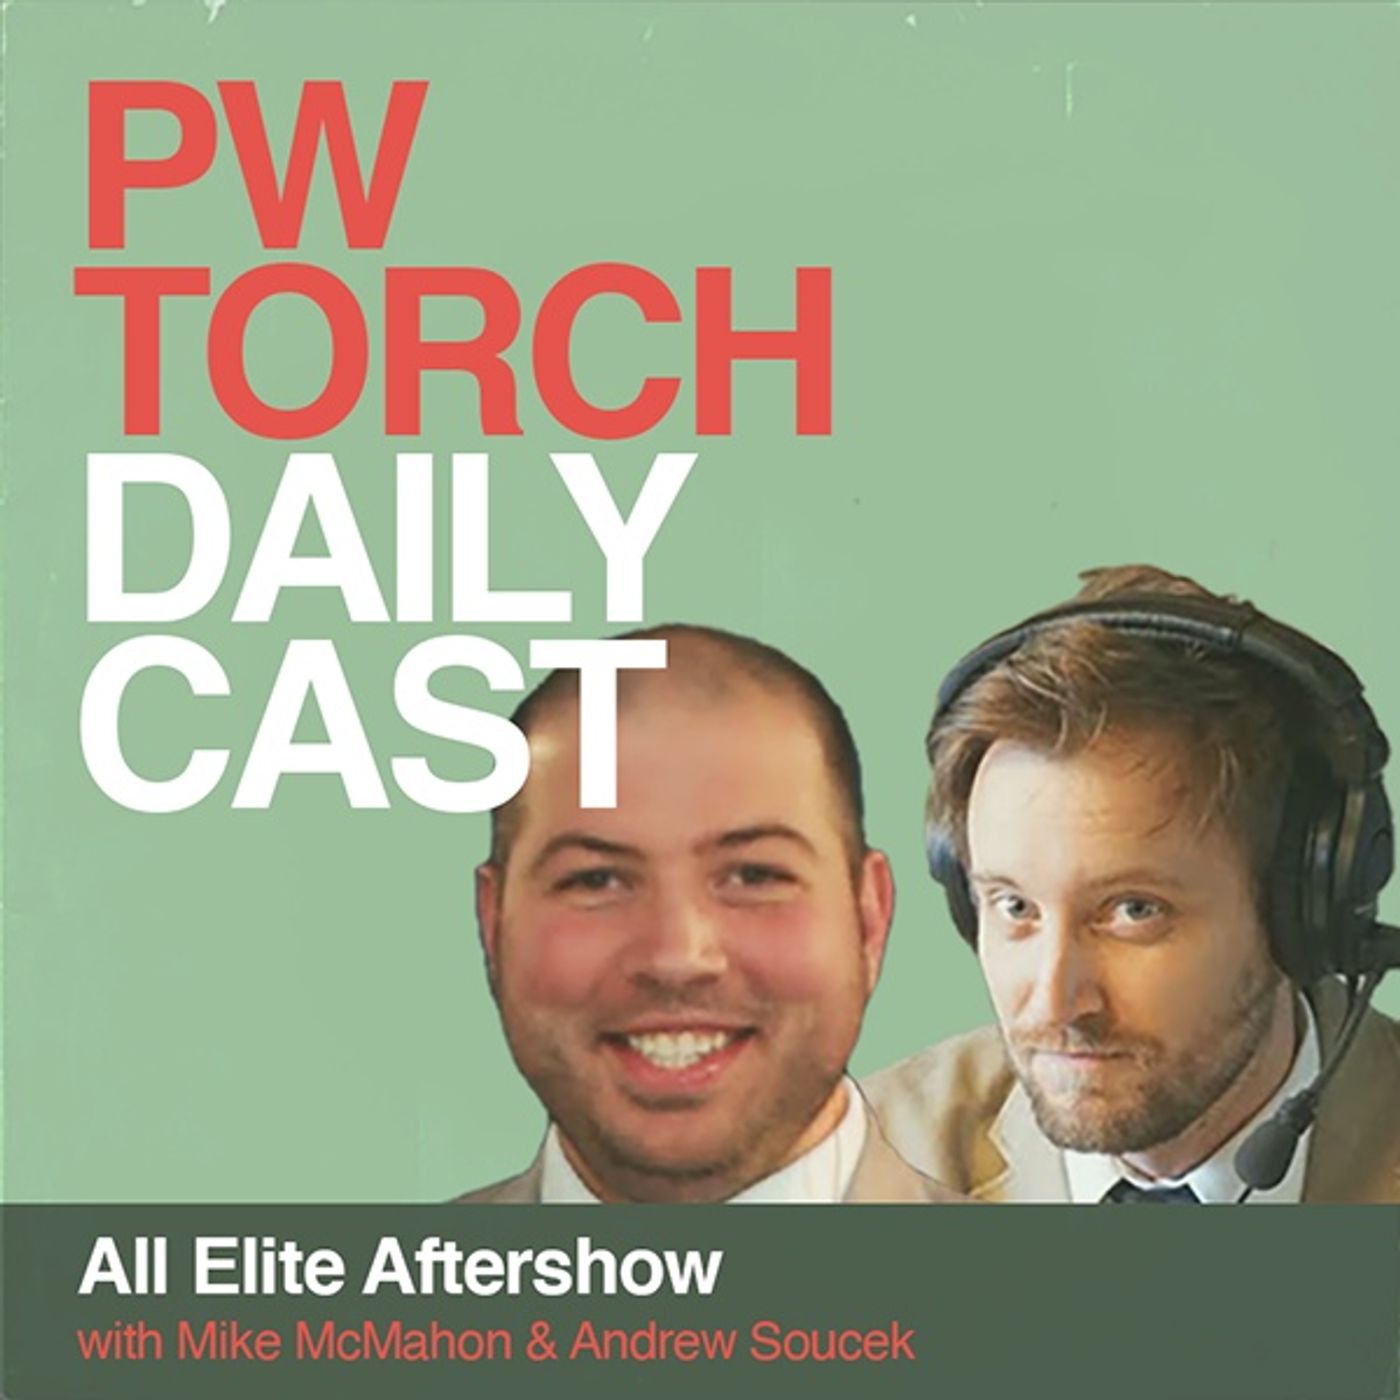 PWTorch Dailycast - All Elite Aftershow - McMahon & Soucek discuss AEW Revolution and take emails